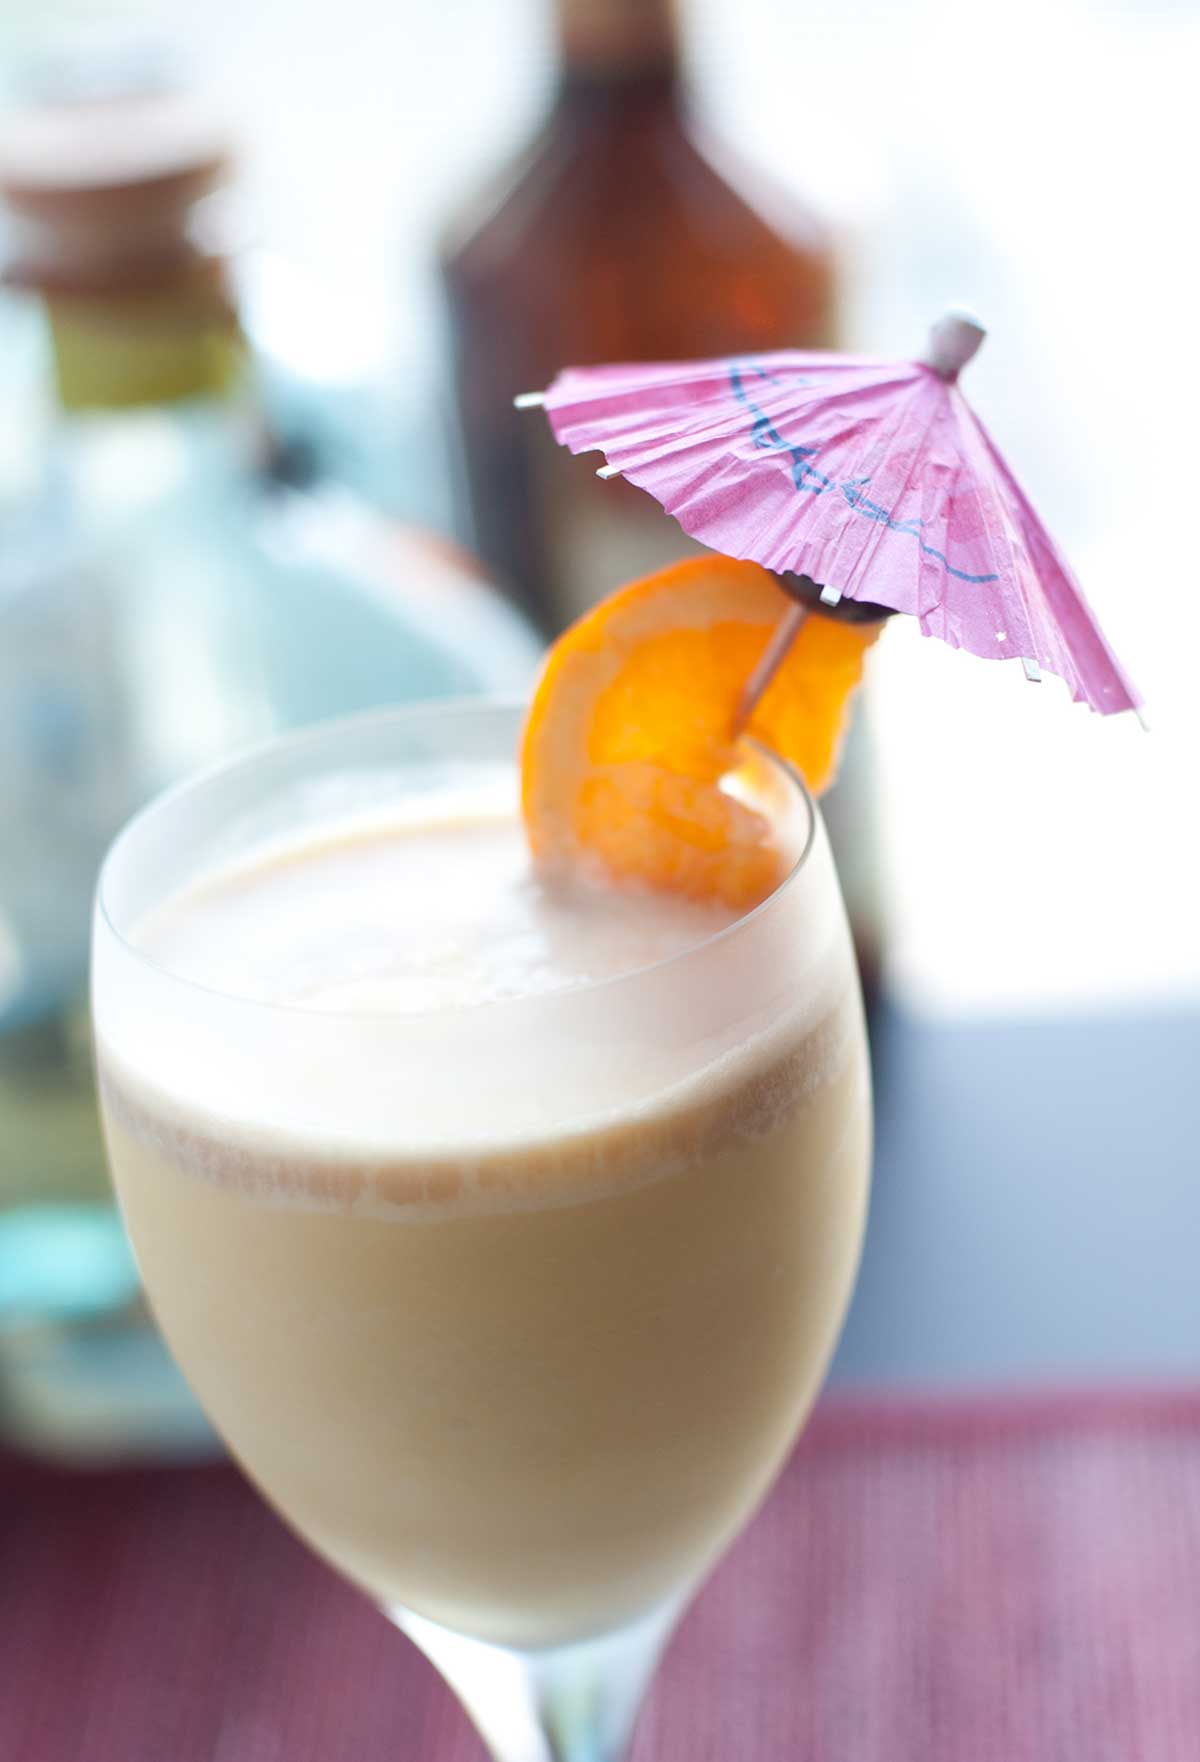 A wine glass filled with frozen Long Island iced tea, garnished with an orange slice on an umbrella.